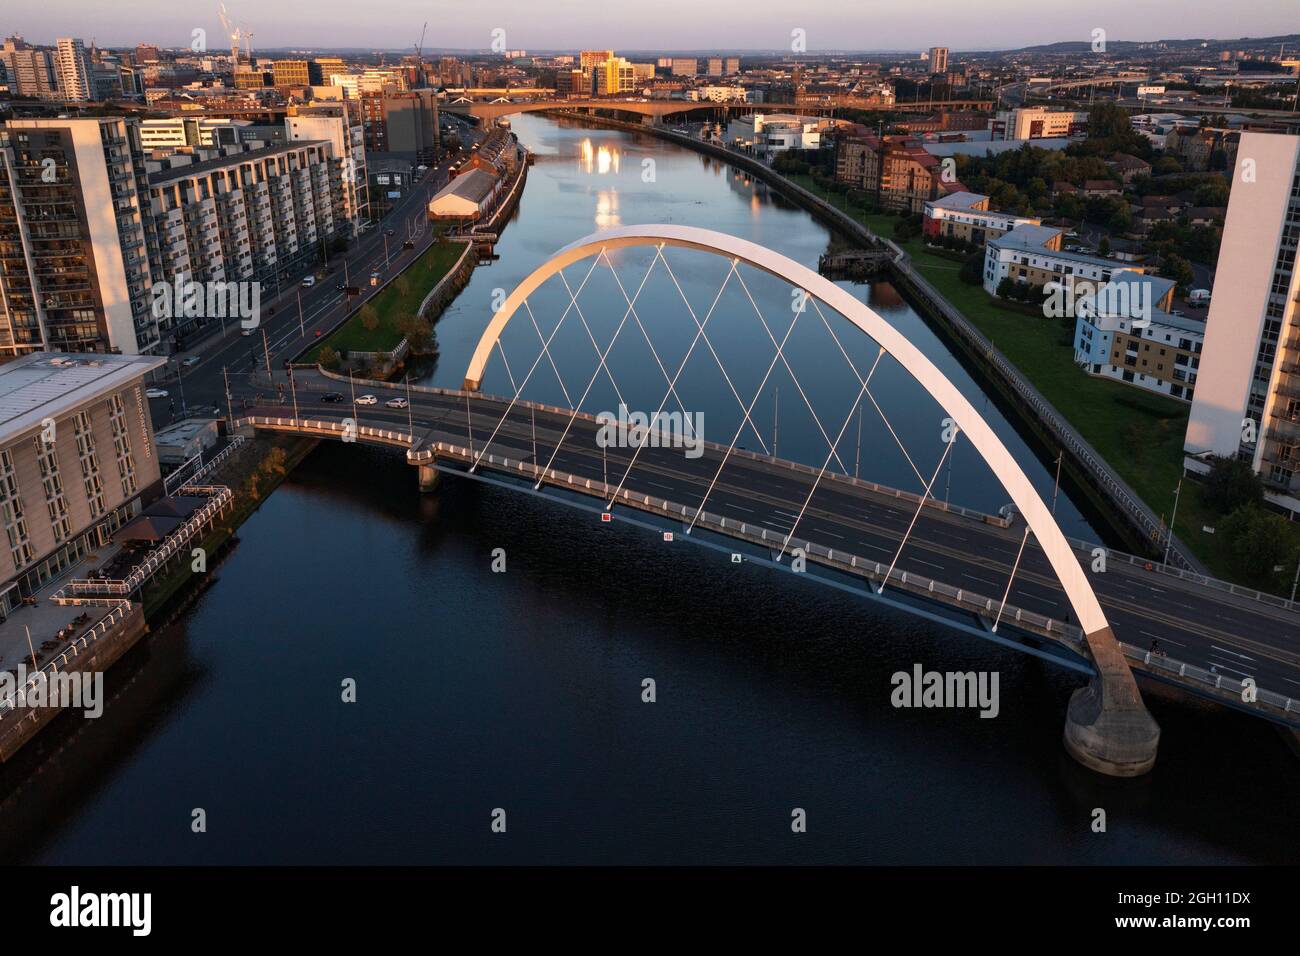 Glasgow, Scotland, 1 September 2021. PICTURED: The Clyde Arc (known locally as the Squinty Bridge). Drone aerial view looking down from above of the COP26 venue which takes place at Glasgow’s SEC (Scottish Event Campus) which was formerly known as the SECC (Scottish Exhibition and Conference Centre) along with the SEC Armadillo and SSE Hydro Arena which forms the new campus. The Climate Change conference COP26 will be hosted here from 1st to 12th November this year.  Credit: Colin Fisher. Stock Photo